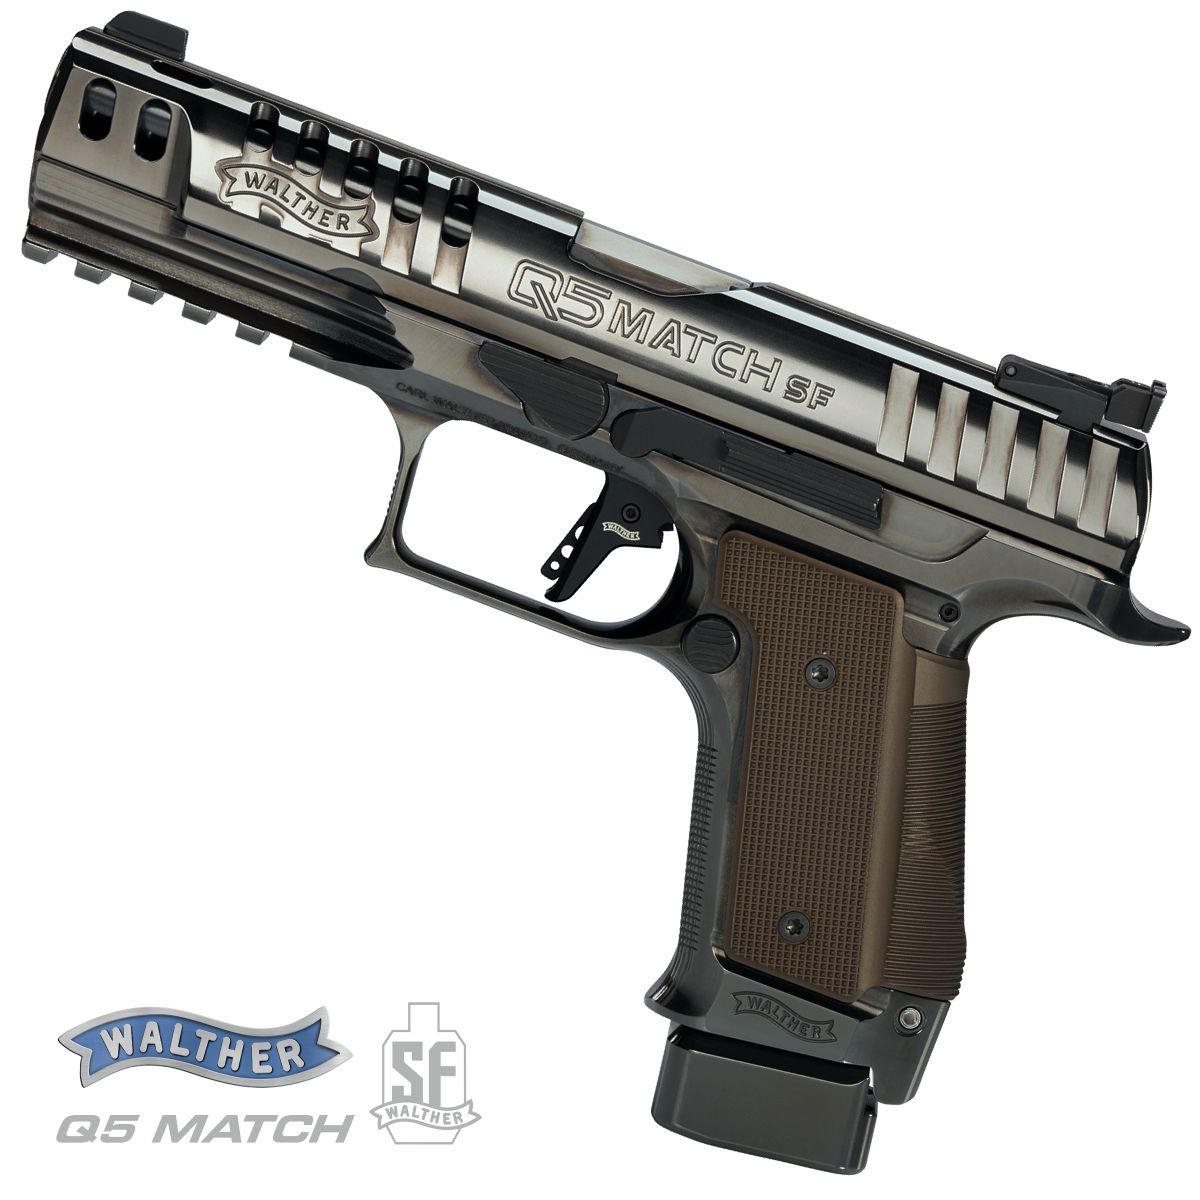 Walther Q5 Match Steel Frame Patriot 5